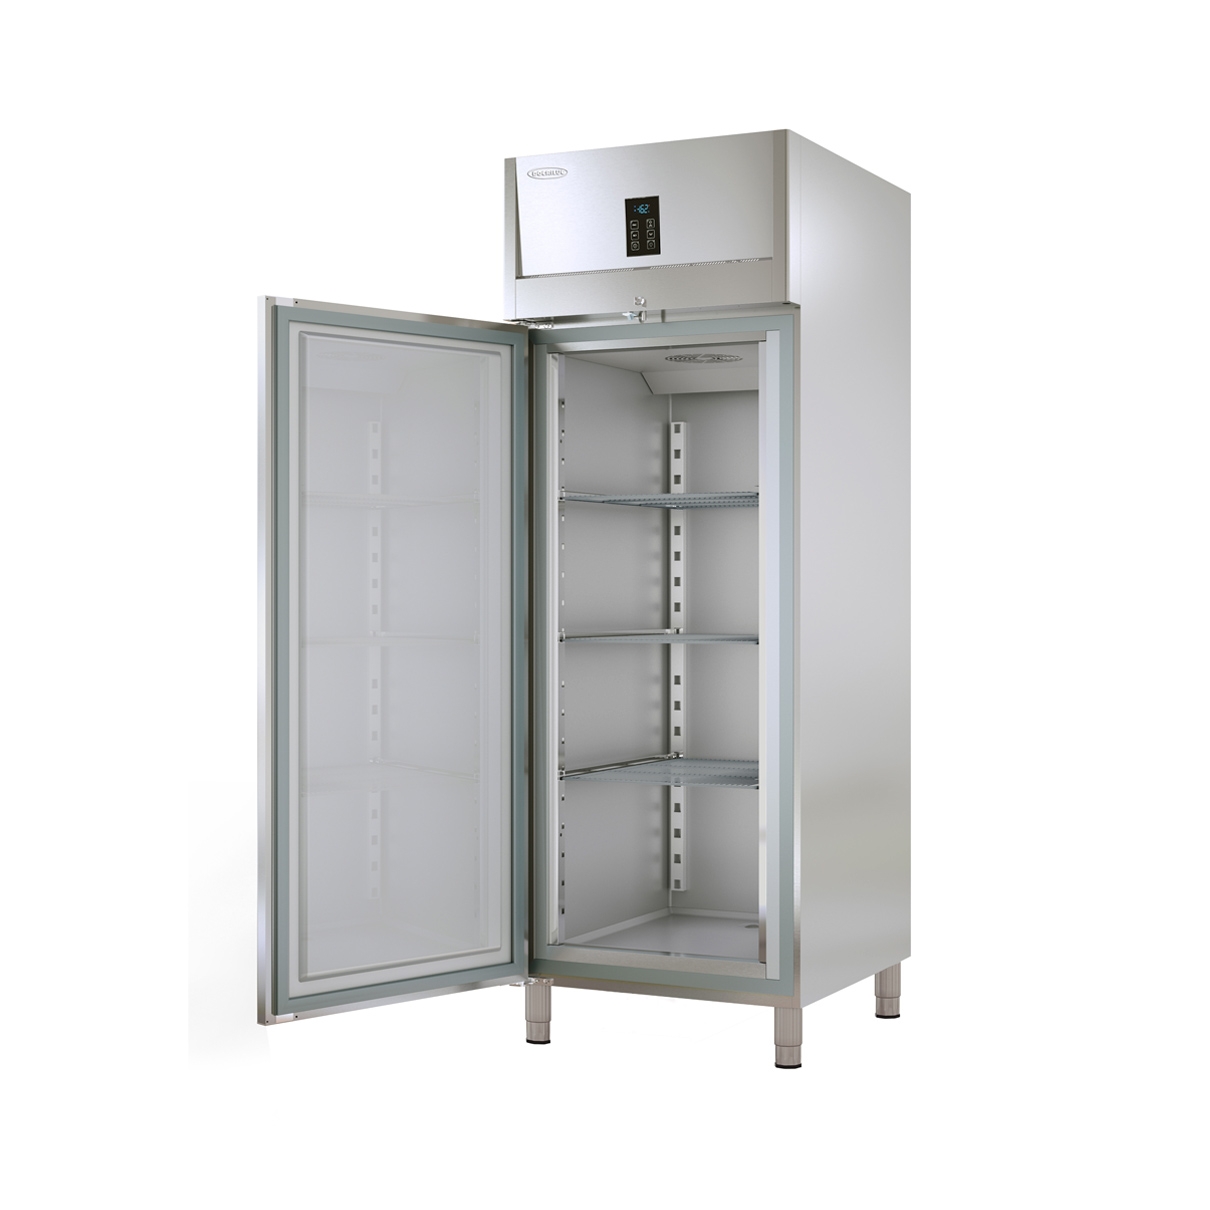 Gastronorm 2/1 High Efficiency Freezing Cabinet DHEGC-75-1